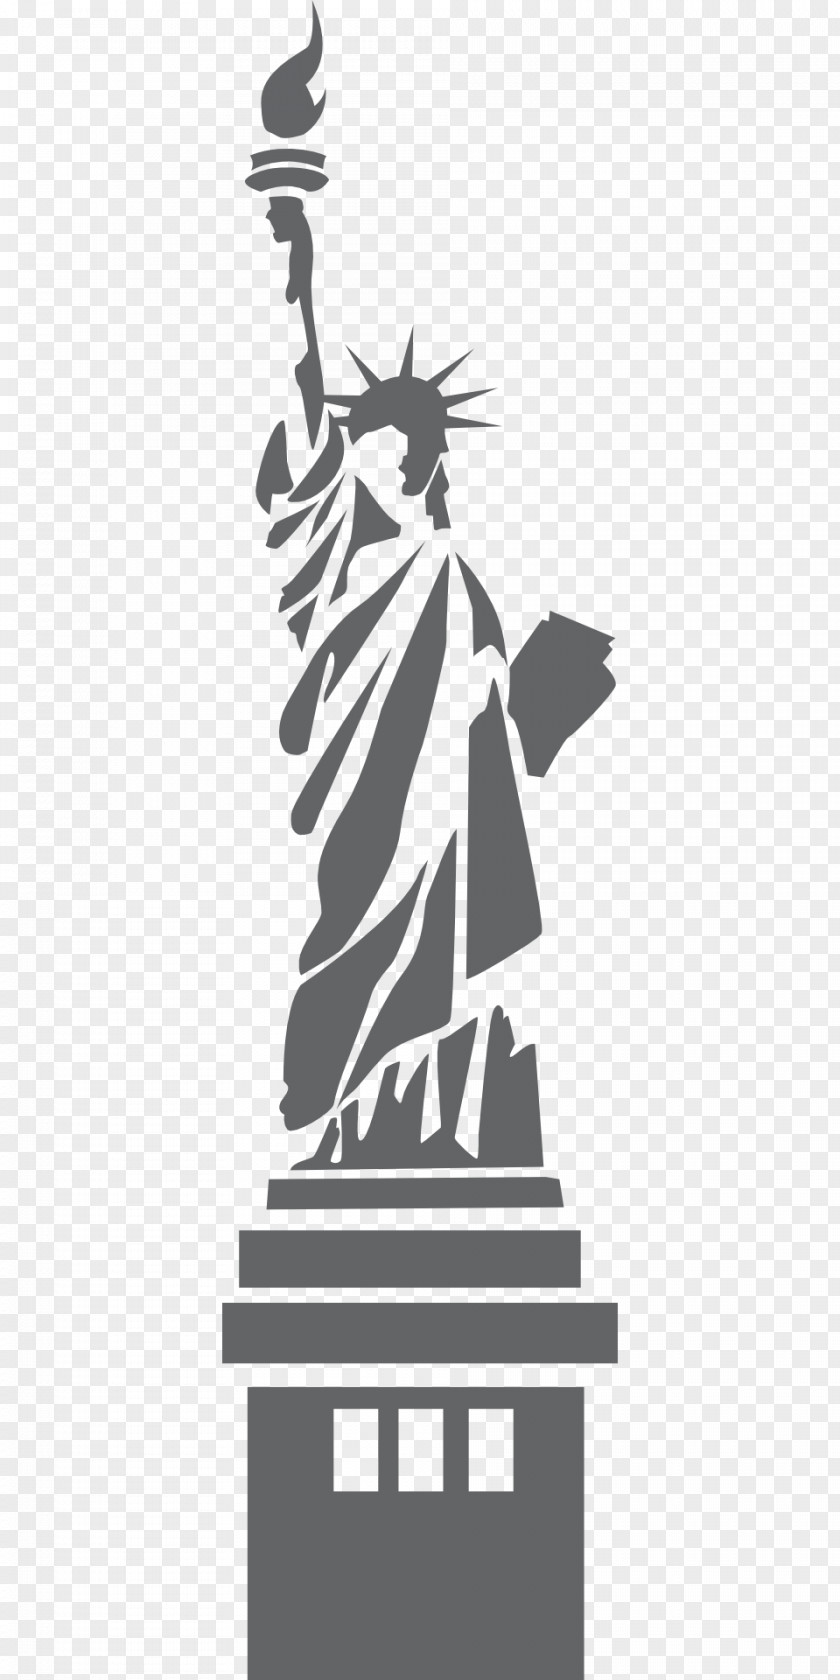 Statue Of Liberty Silhouette Clip Art PNG